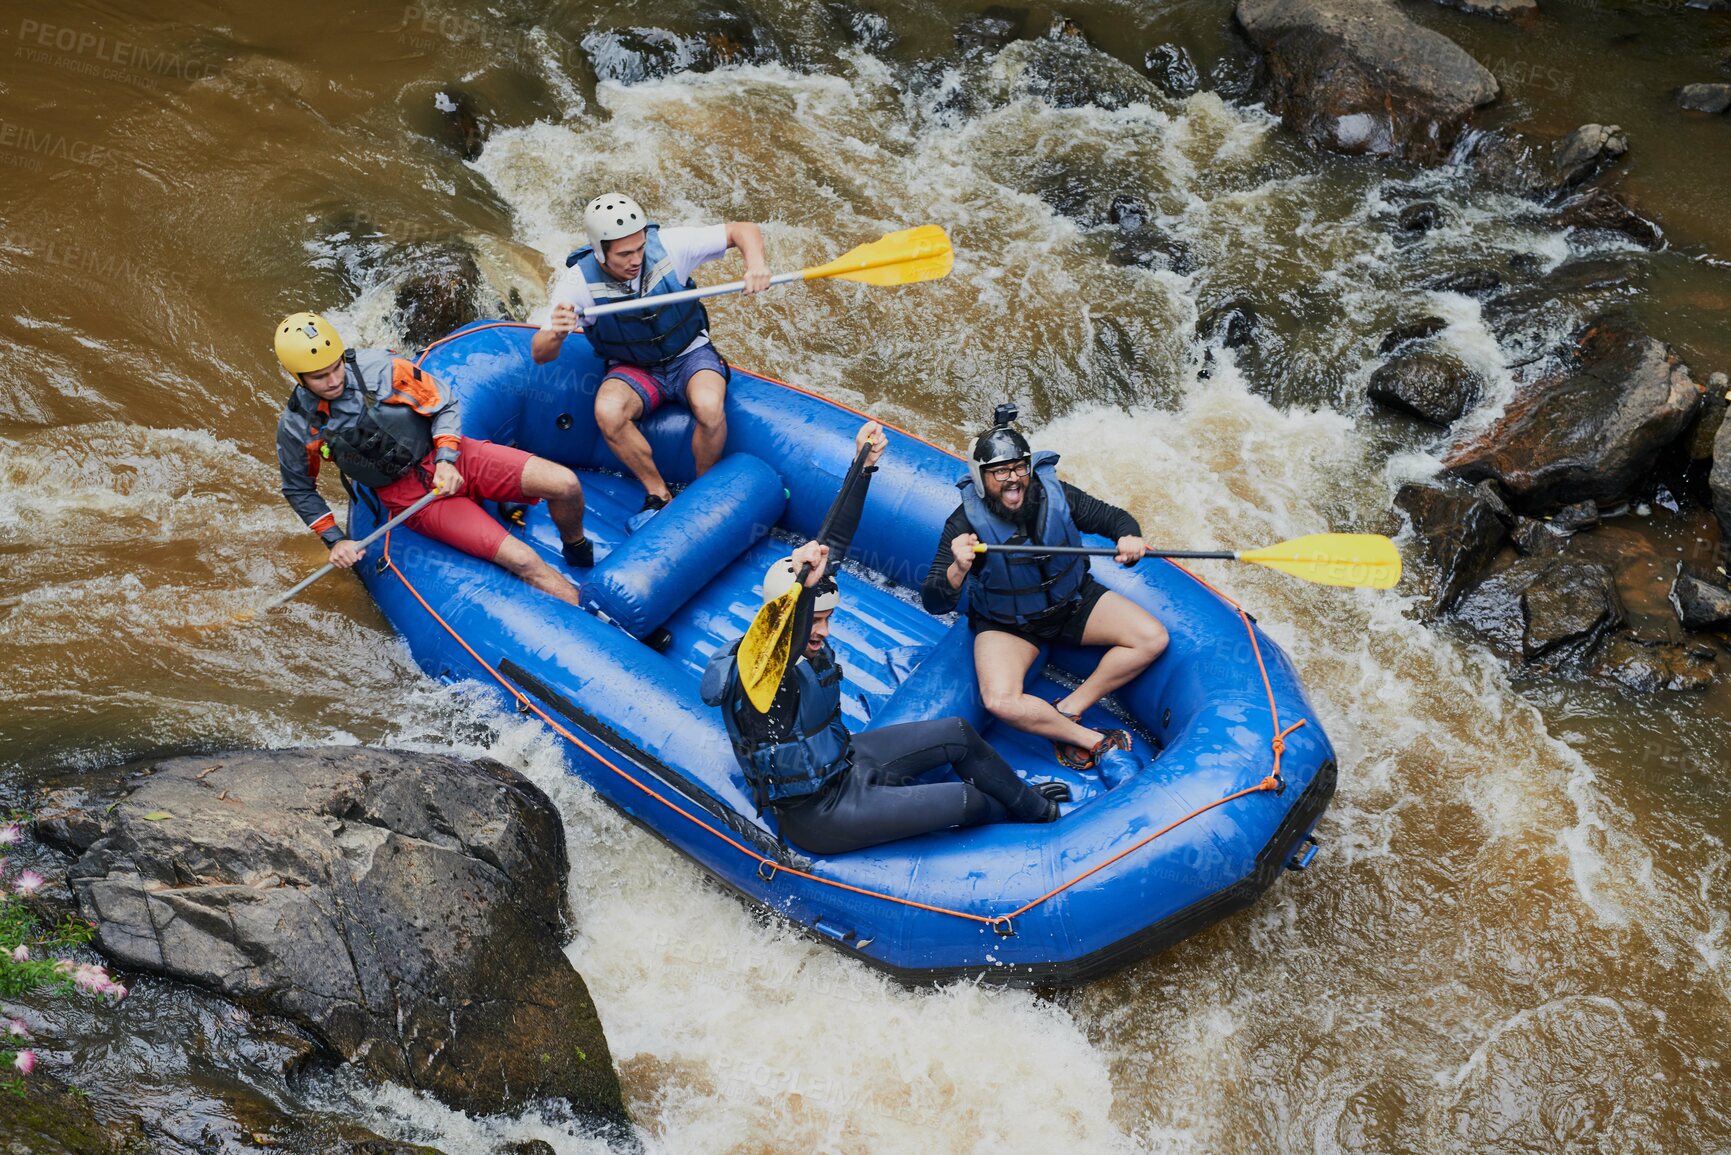 Buy stock photo Shot of a group of young male friends white water rafting